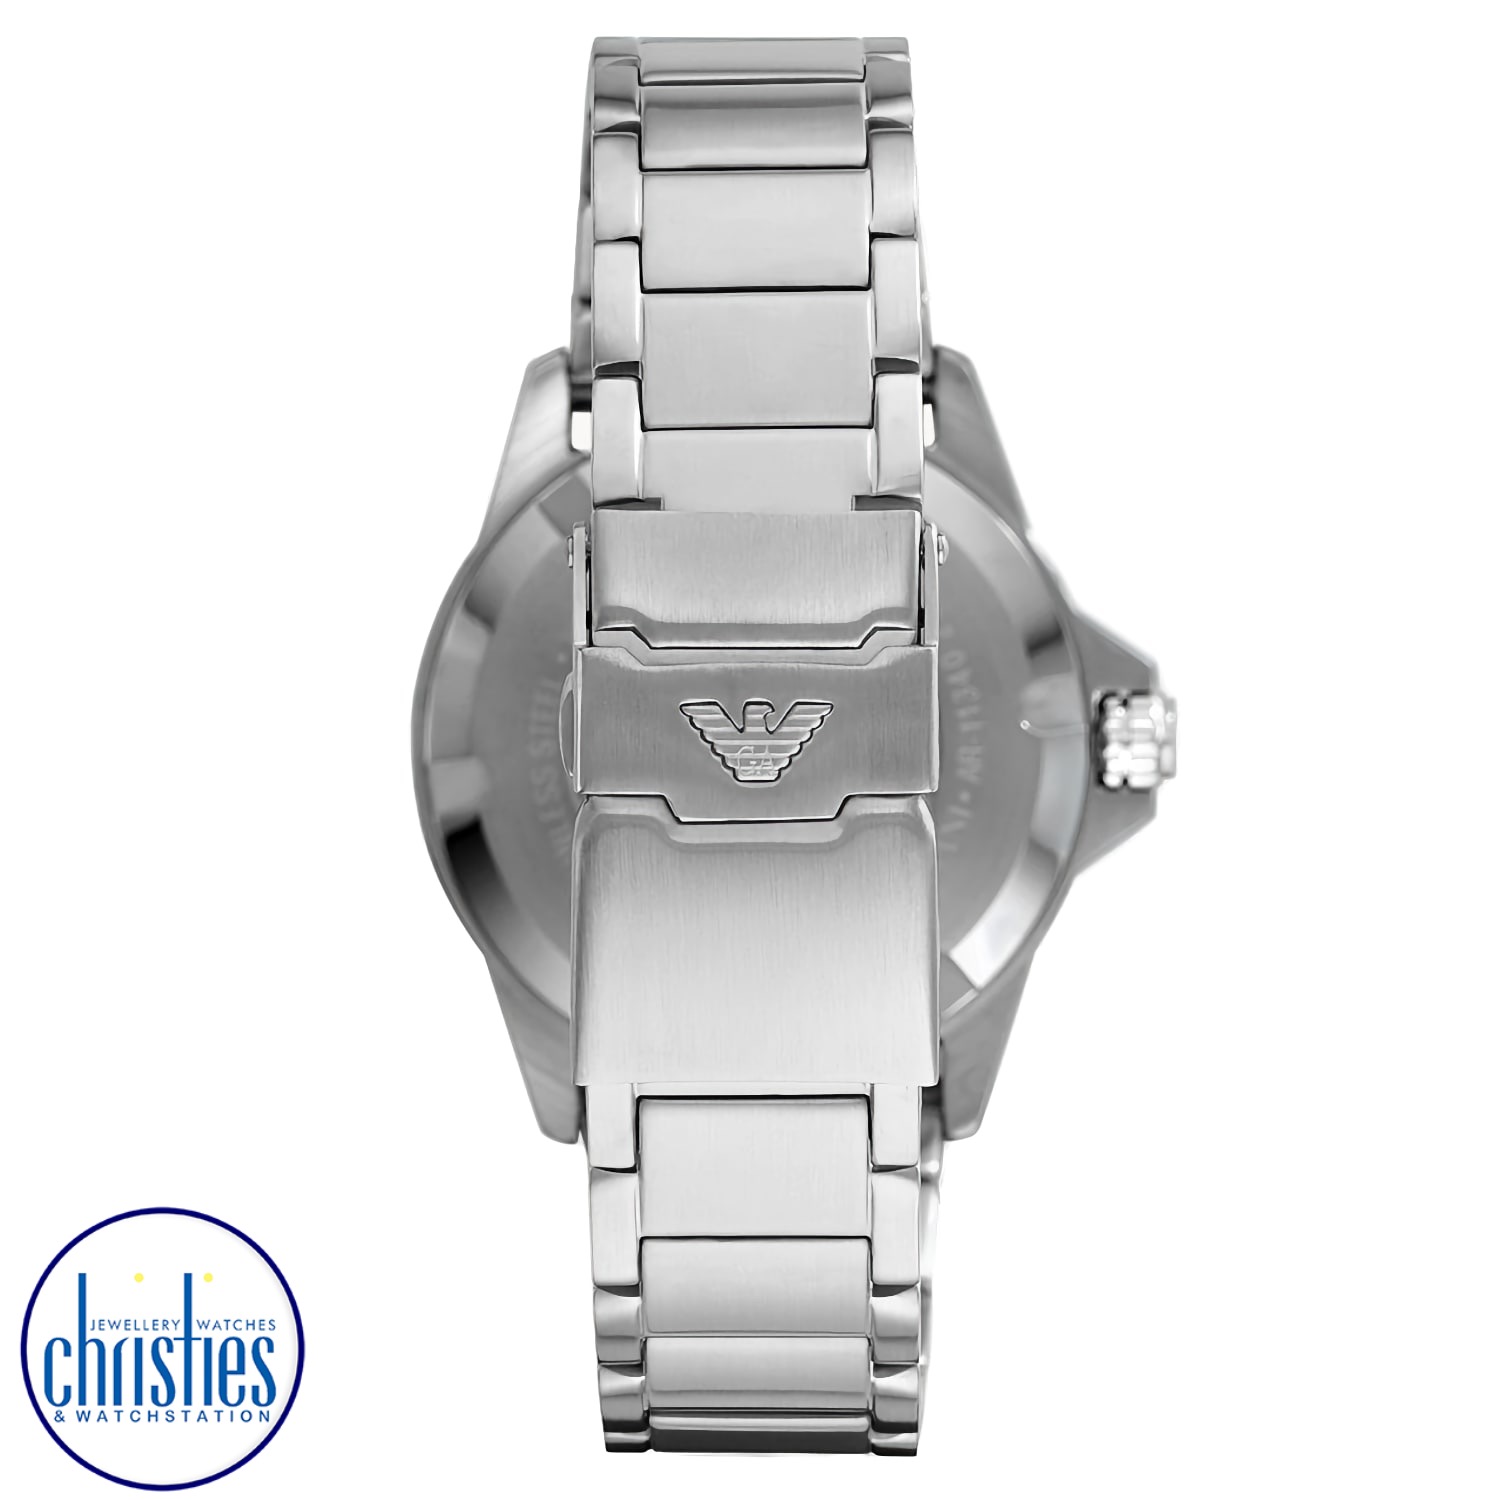 AR11339 Emporio Armani Three-Hand Date Stainless Steel Watch. Armani Exchange is a sub-brand to Armani, with focus on the younger generation.